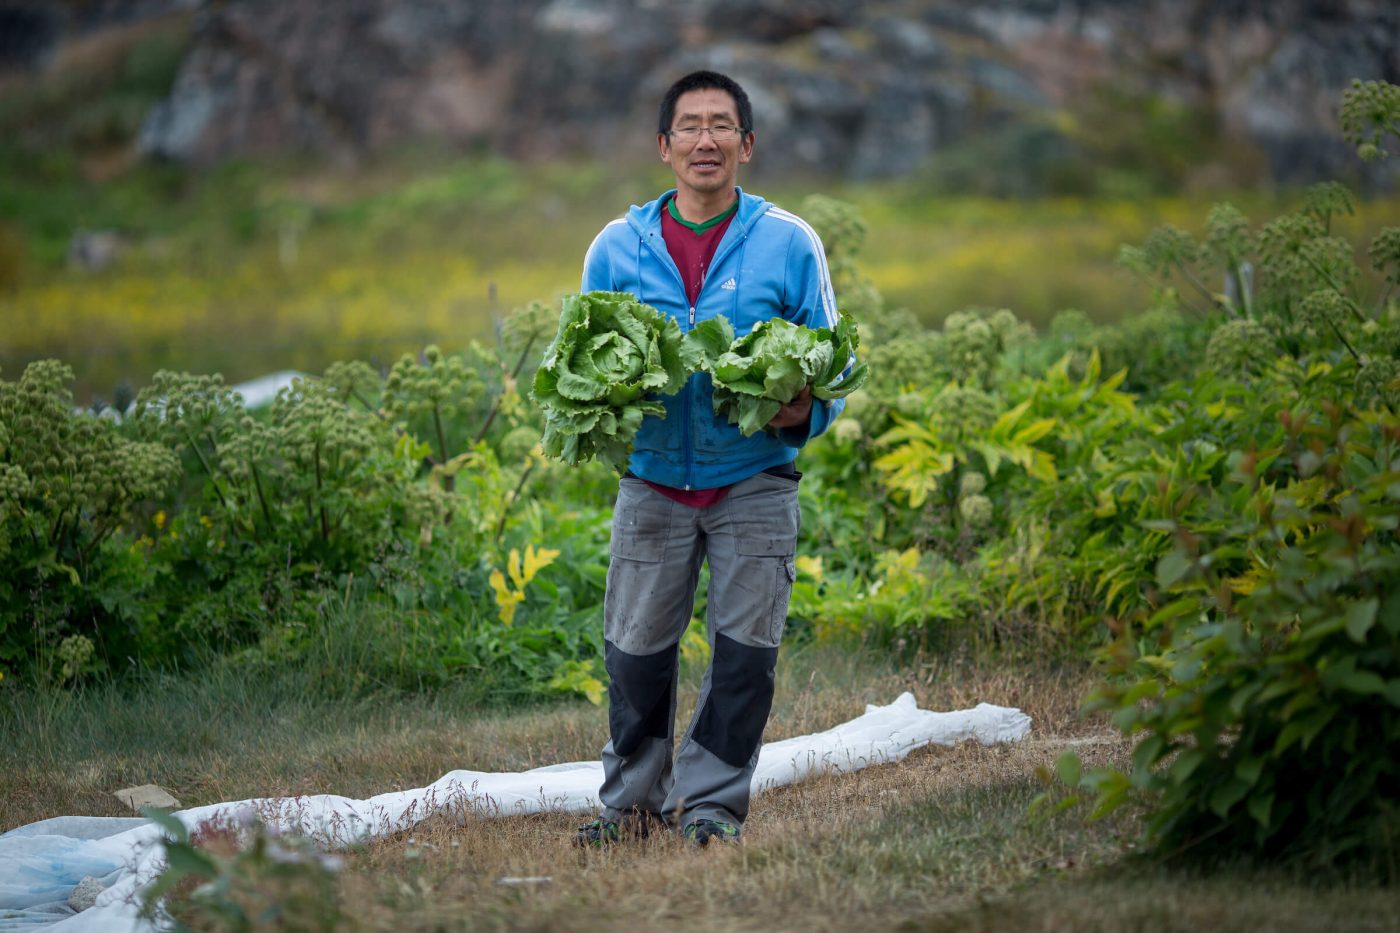 A gardener from Upernaviarsuk research station with fresh lettuce in South Greenland. By Mads Pihl